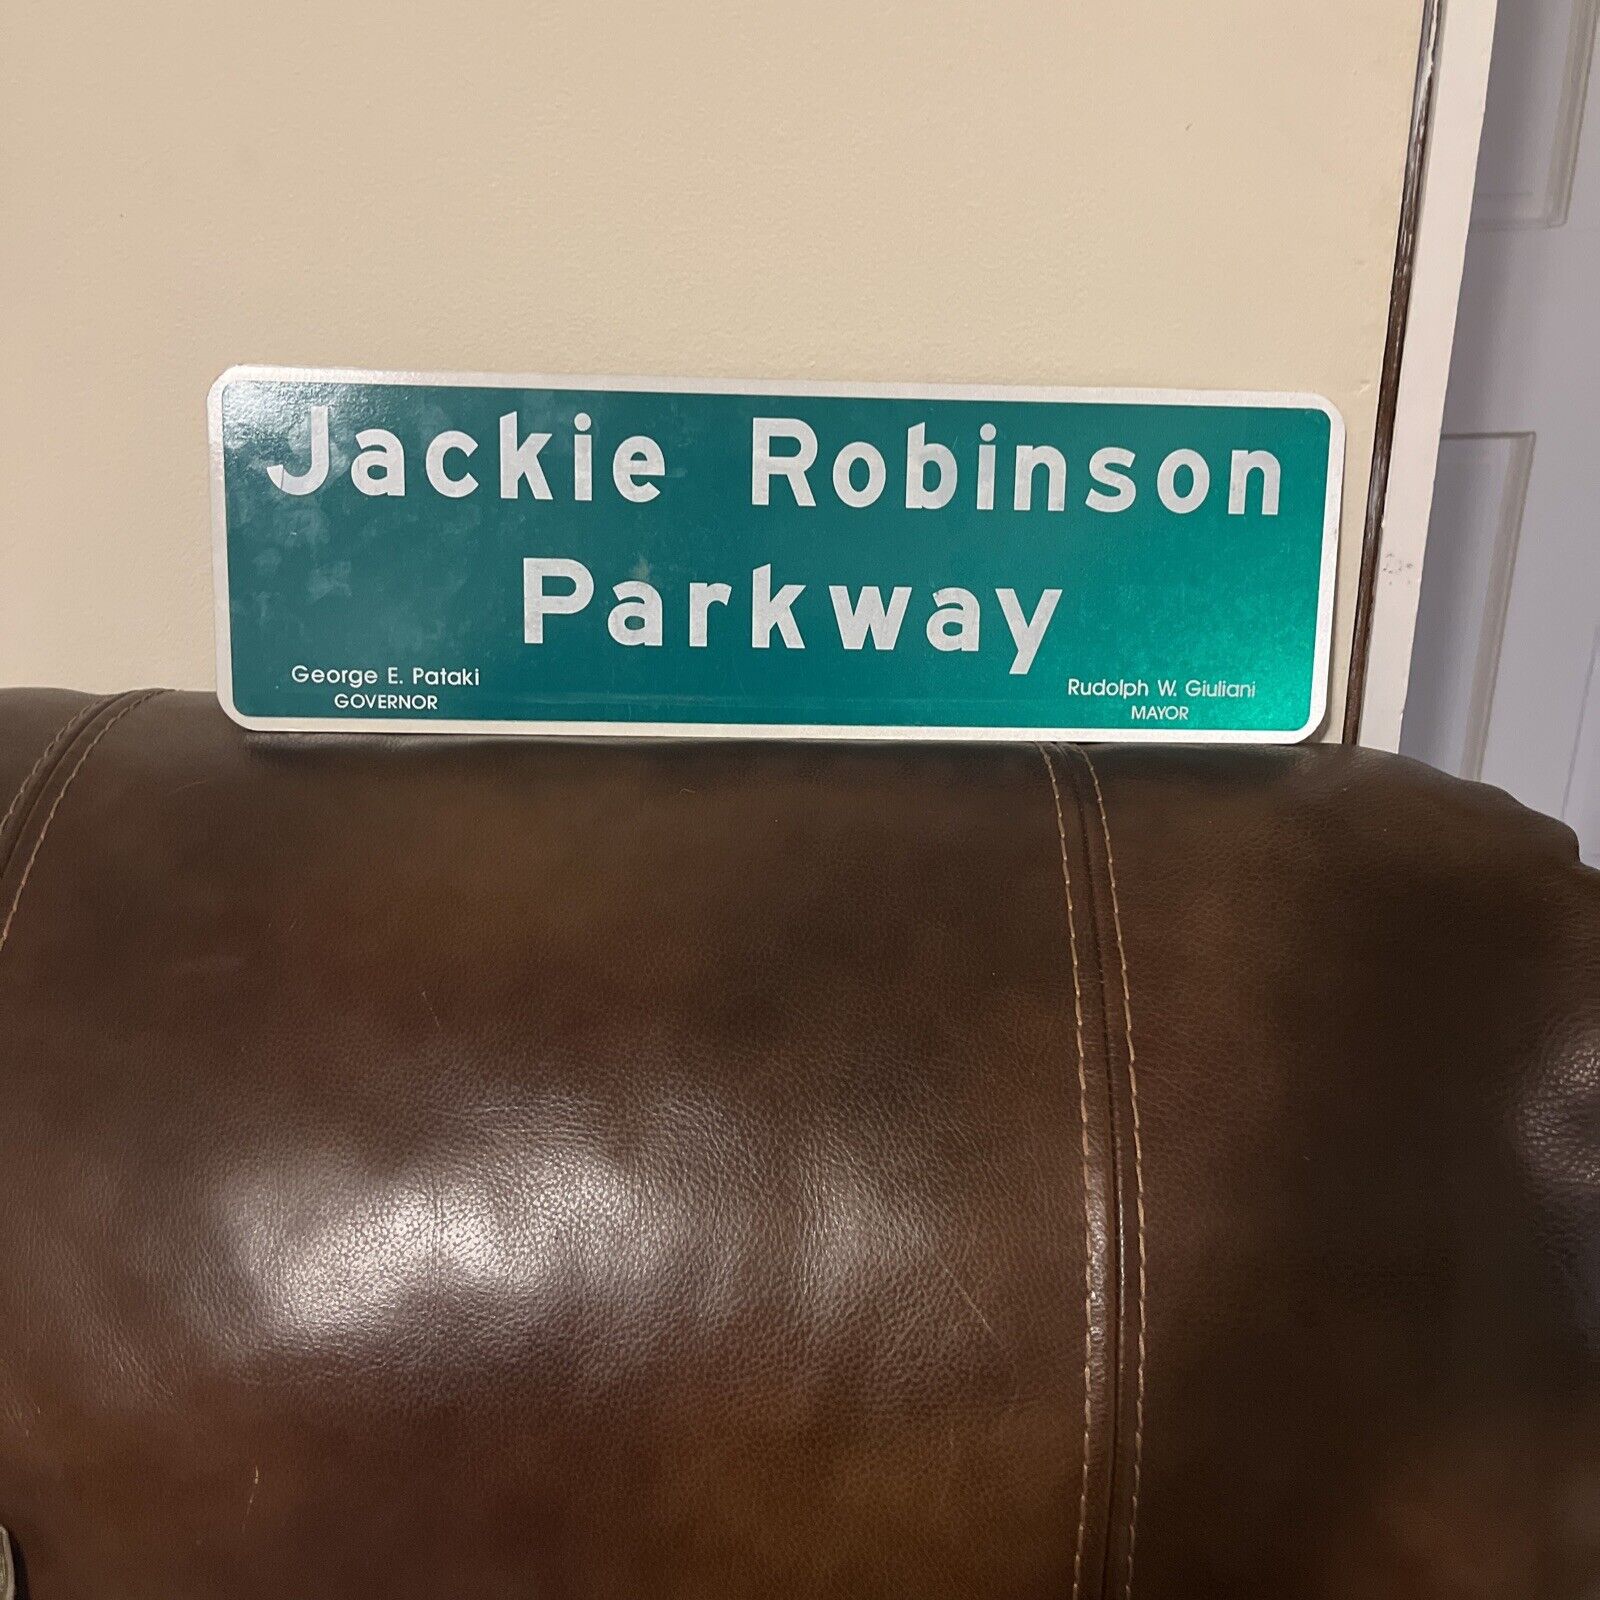 Jackie Robinson highway marker road sign 18” by 6”